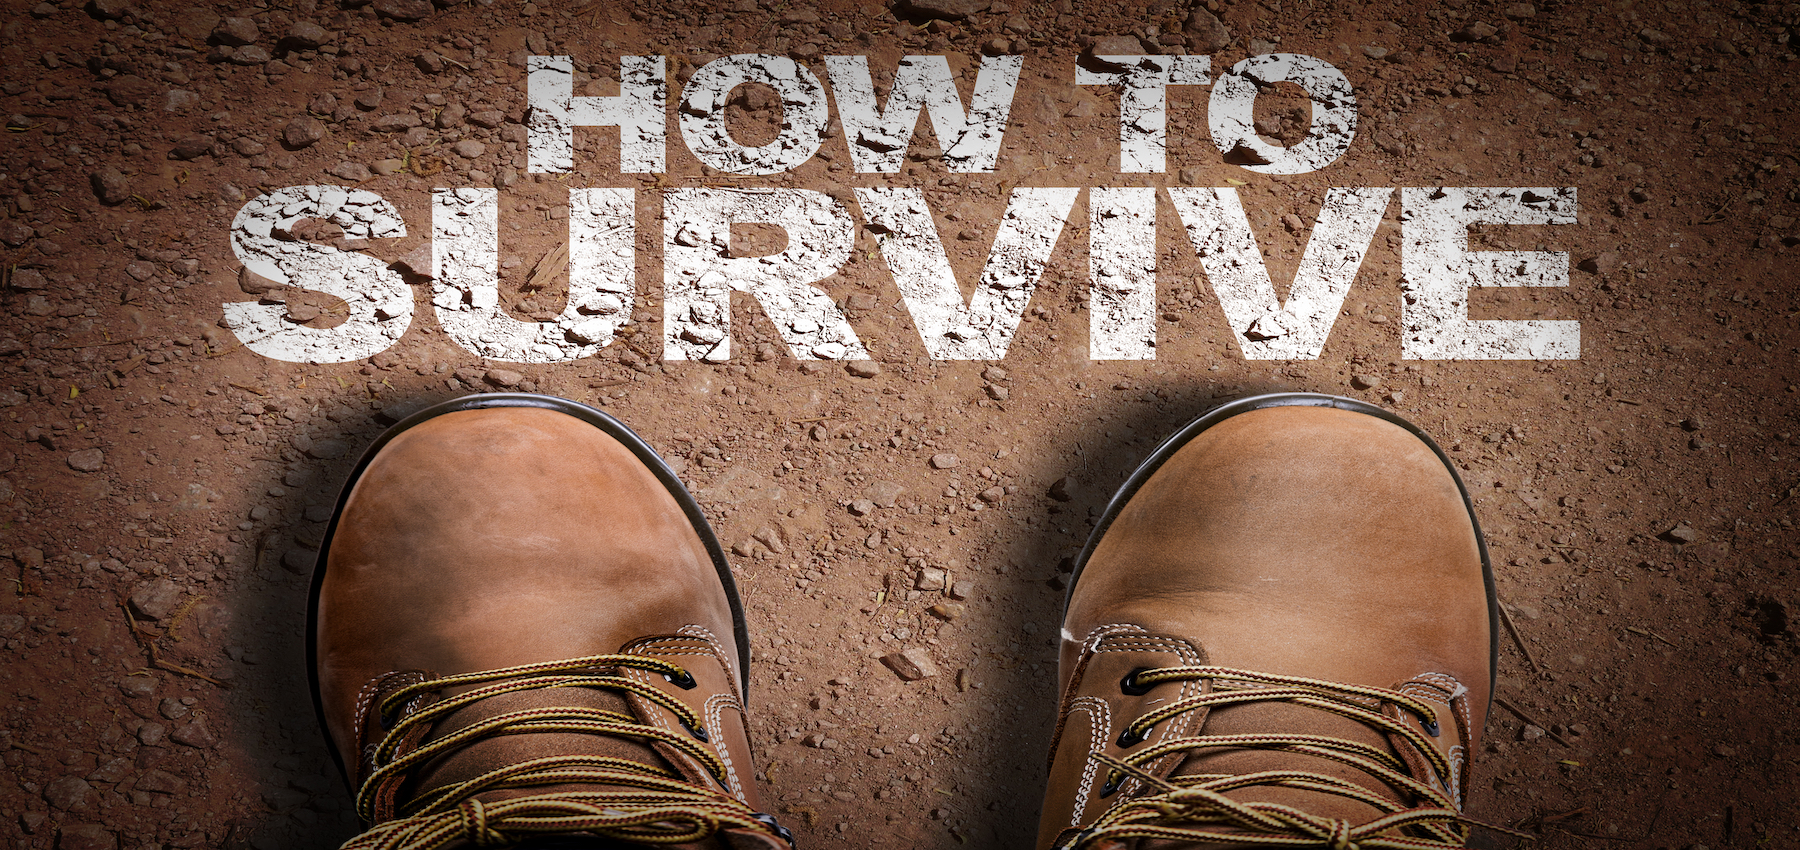 10 survival tips for everday life